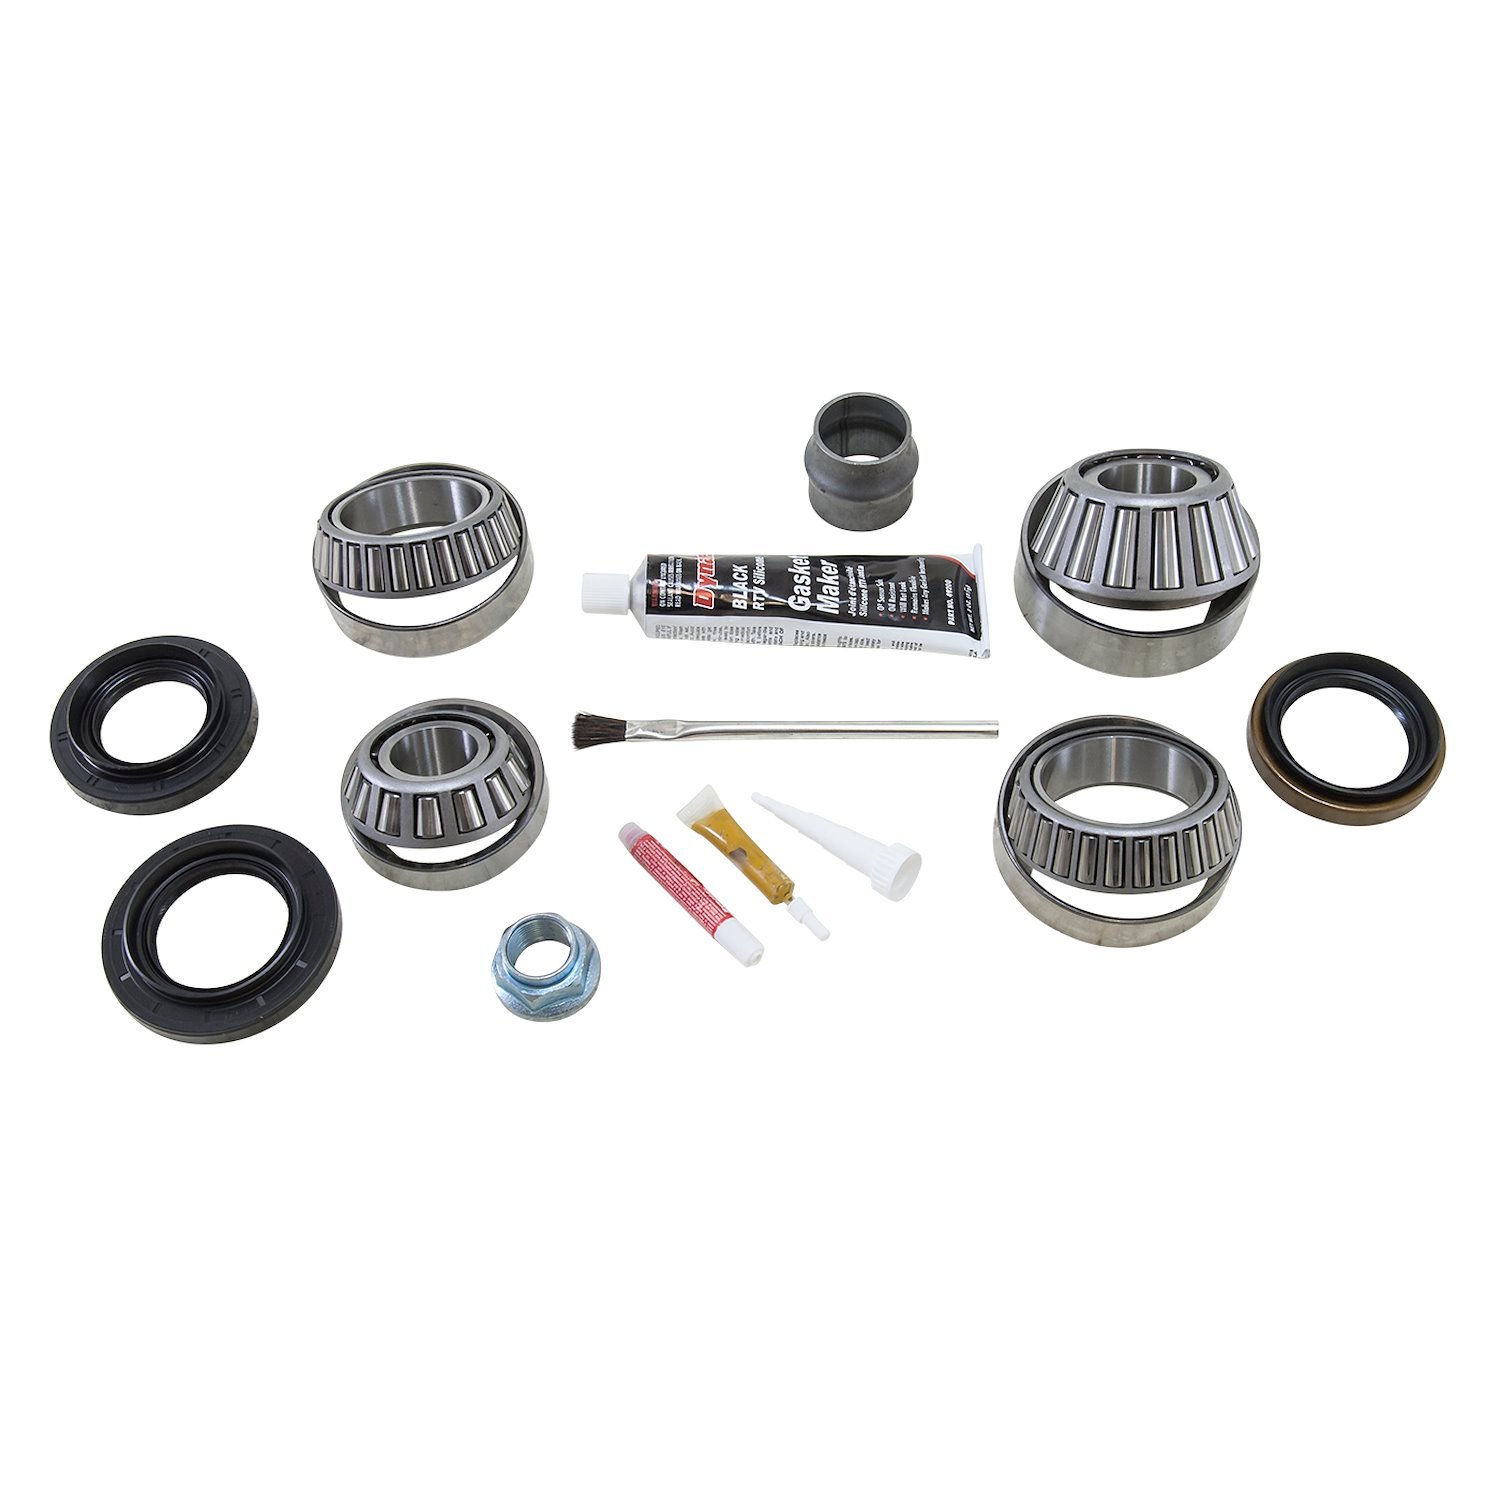 Bearing Install Kit For '91-'97 Toyota Landcruiser Front Differential